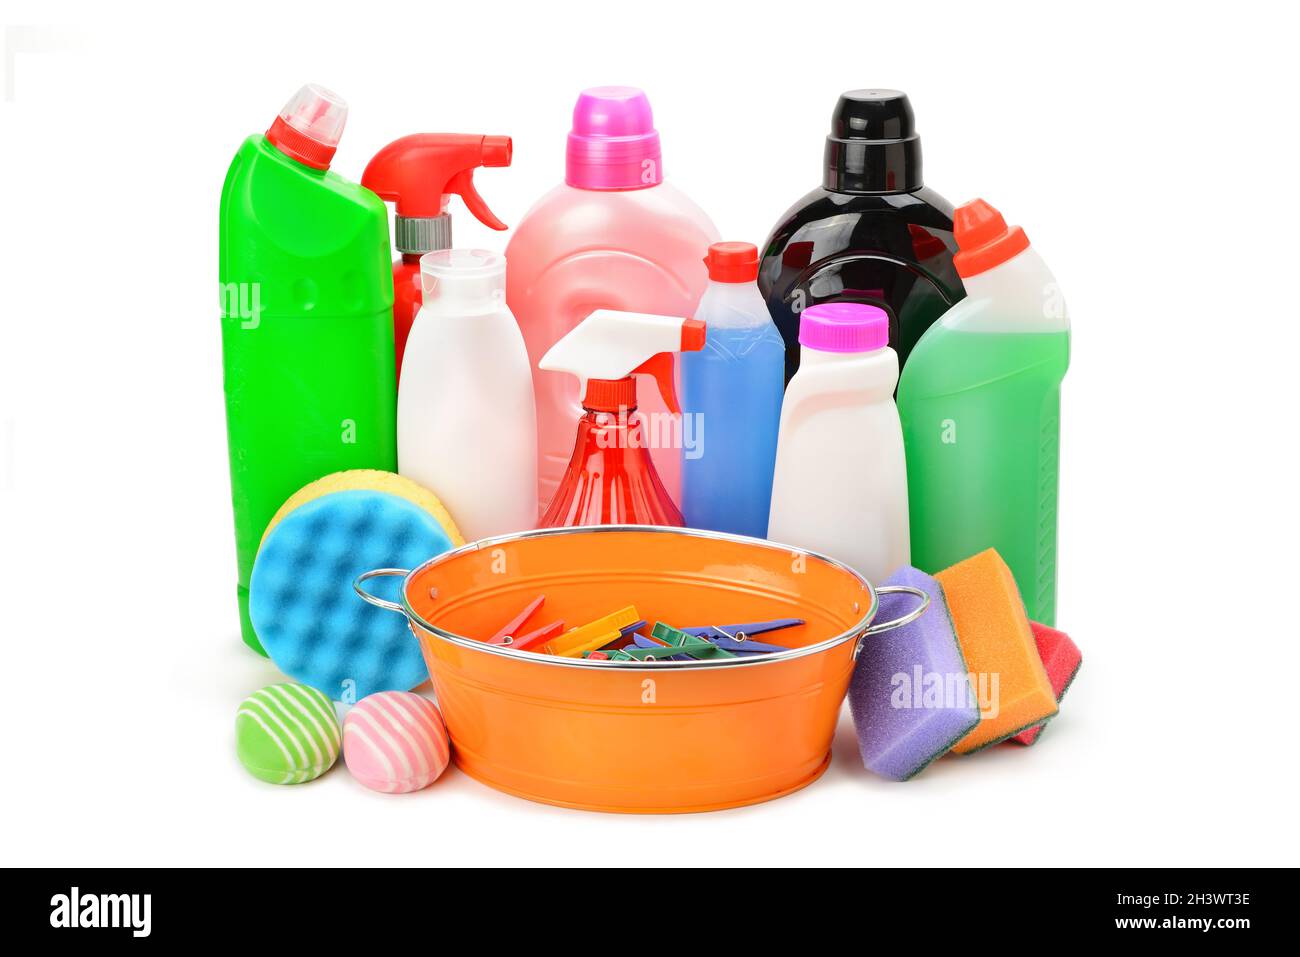 https://c8.alamy.com/comp/2H3WT3E/collection-of-various-household-cleaning-products-isolated-on-a-white-background-2H3WT3E.jpg